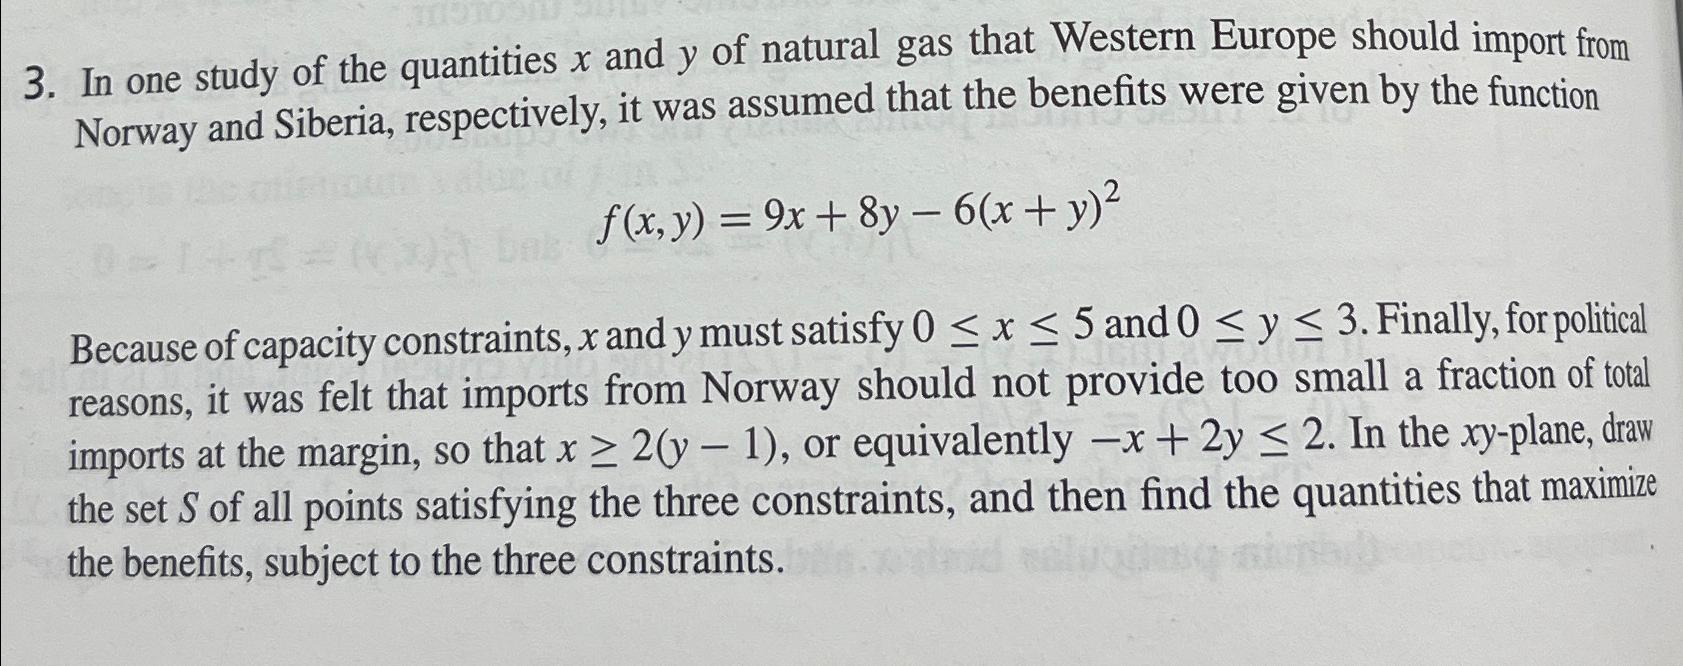 3. In one study of the quantities x and y of natural gas that Western Europe should import from Norway and